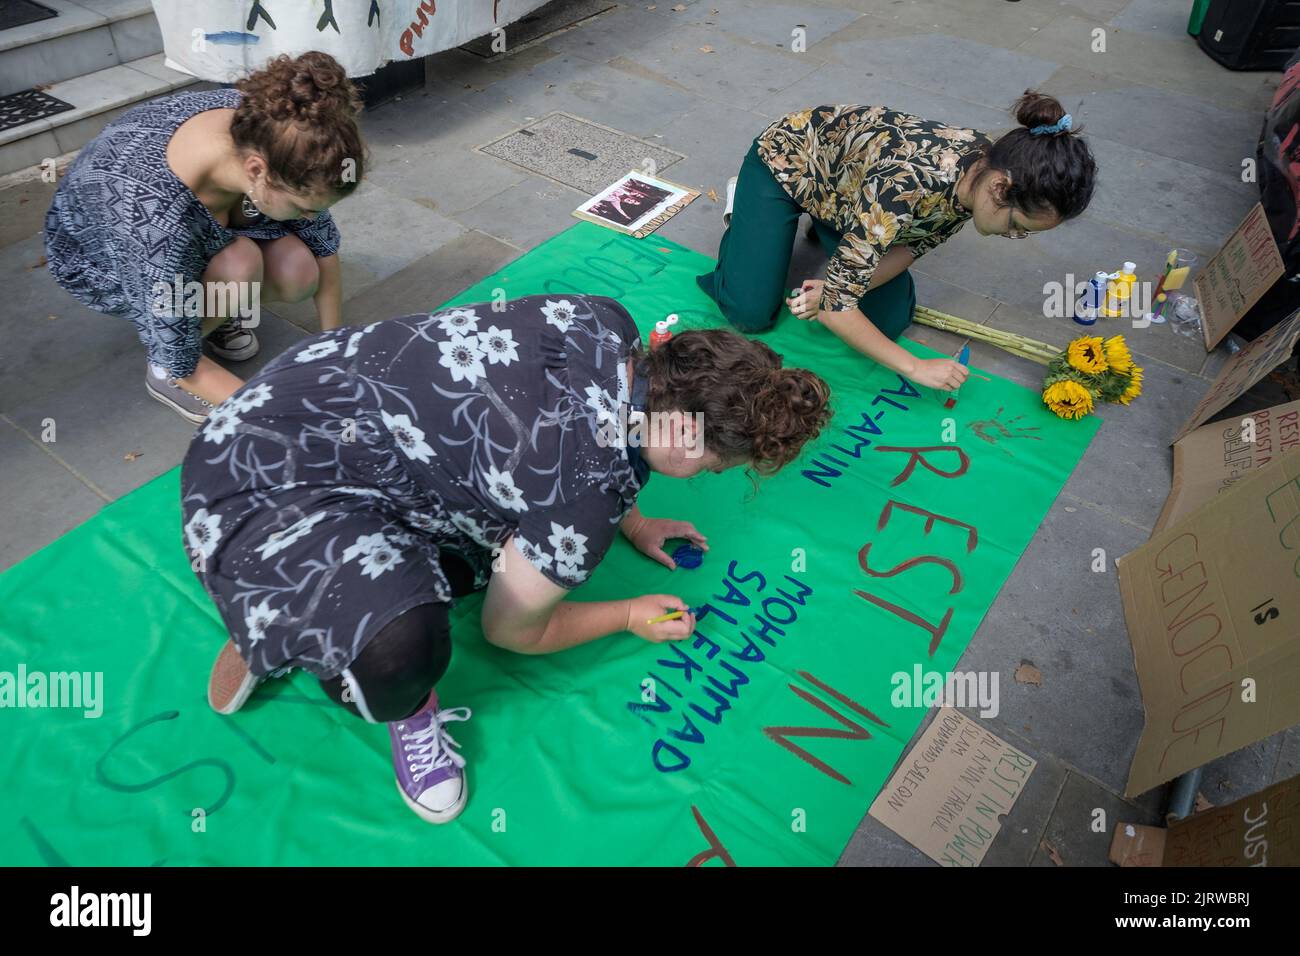 London, UK. 26th Aug, 2022. People paint a tribute at Phulbari Solidarity Group vigil at the Bangladesh High Commission on the 16th anniversary of the Phulbari Massacre. 3 people were shot dead at a huge non-violent protest against London mining company GCM's plans to forcibly displace 130,000 people and open cast mine 572 million tons of coal over 30 years. GCM still sells shares on the London Stock Exchange despite having no contract to mine. Credit: Peter Marshall/Alamy Live News Stock Photo